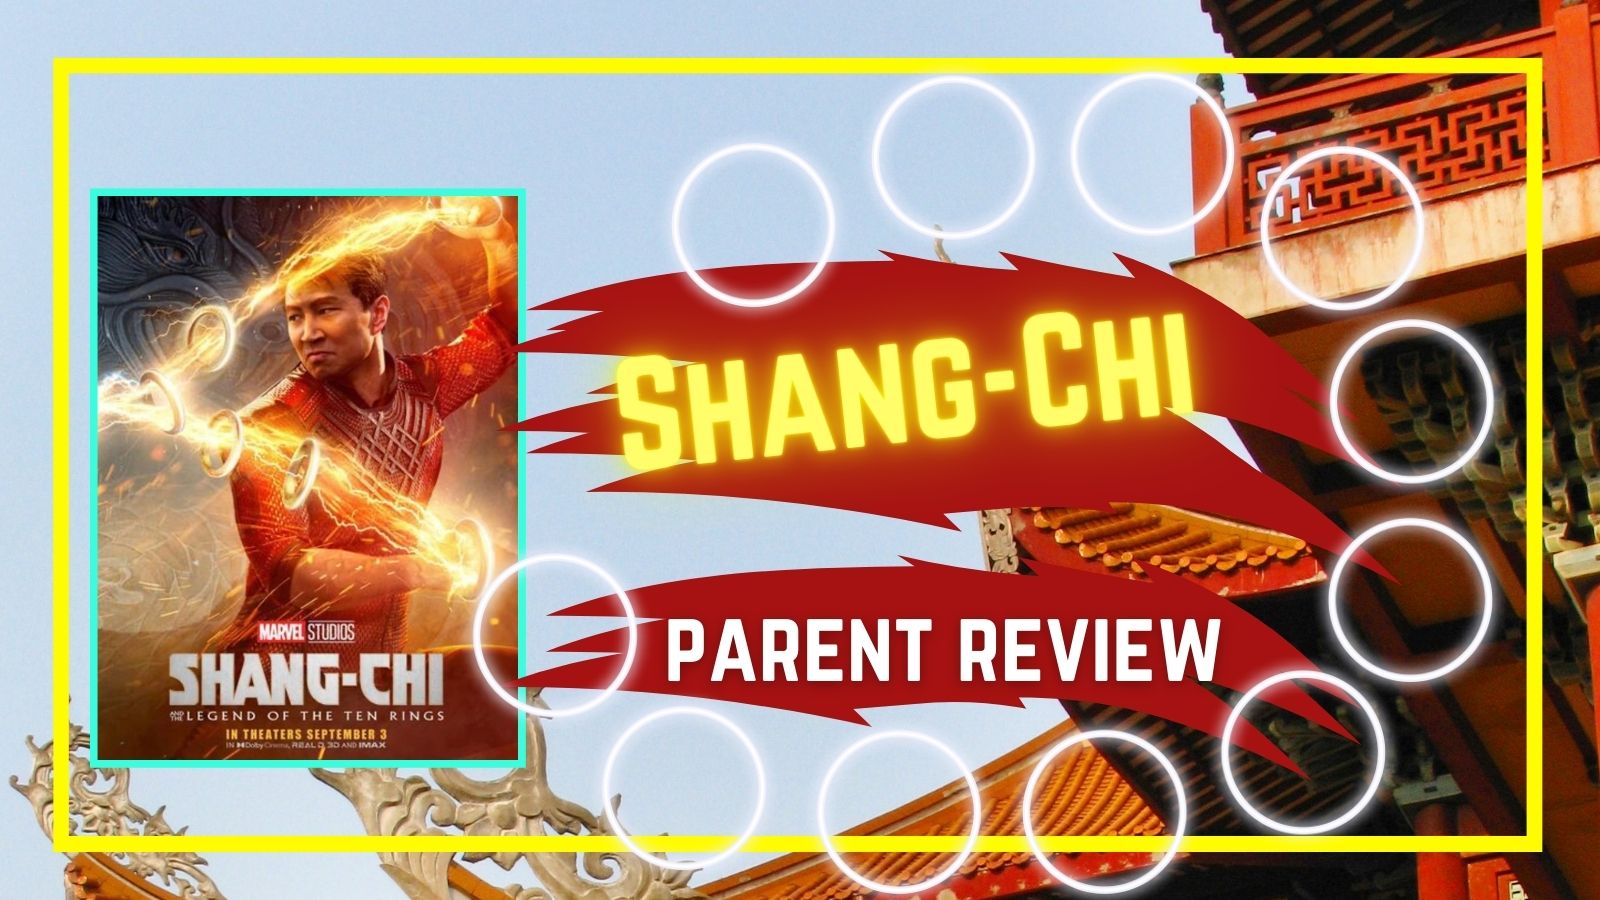 Shang-Chi Parent Review, Shang-Chi discussion questions, Is Shang-Chi appropriate